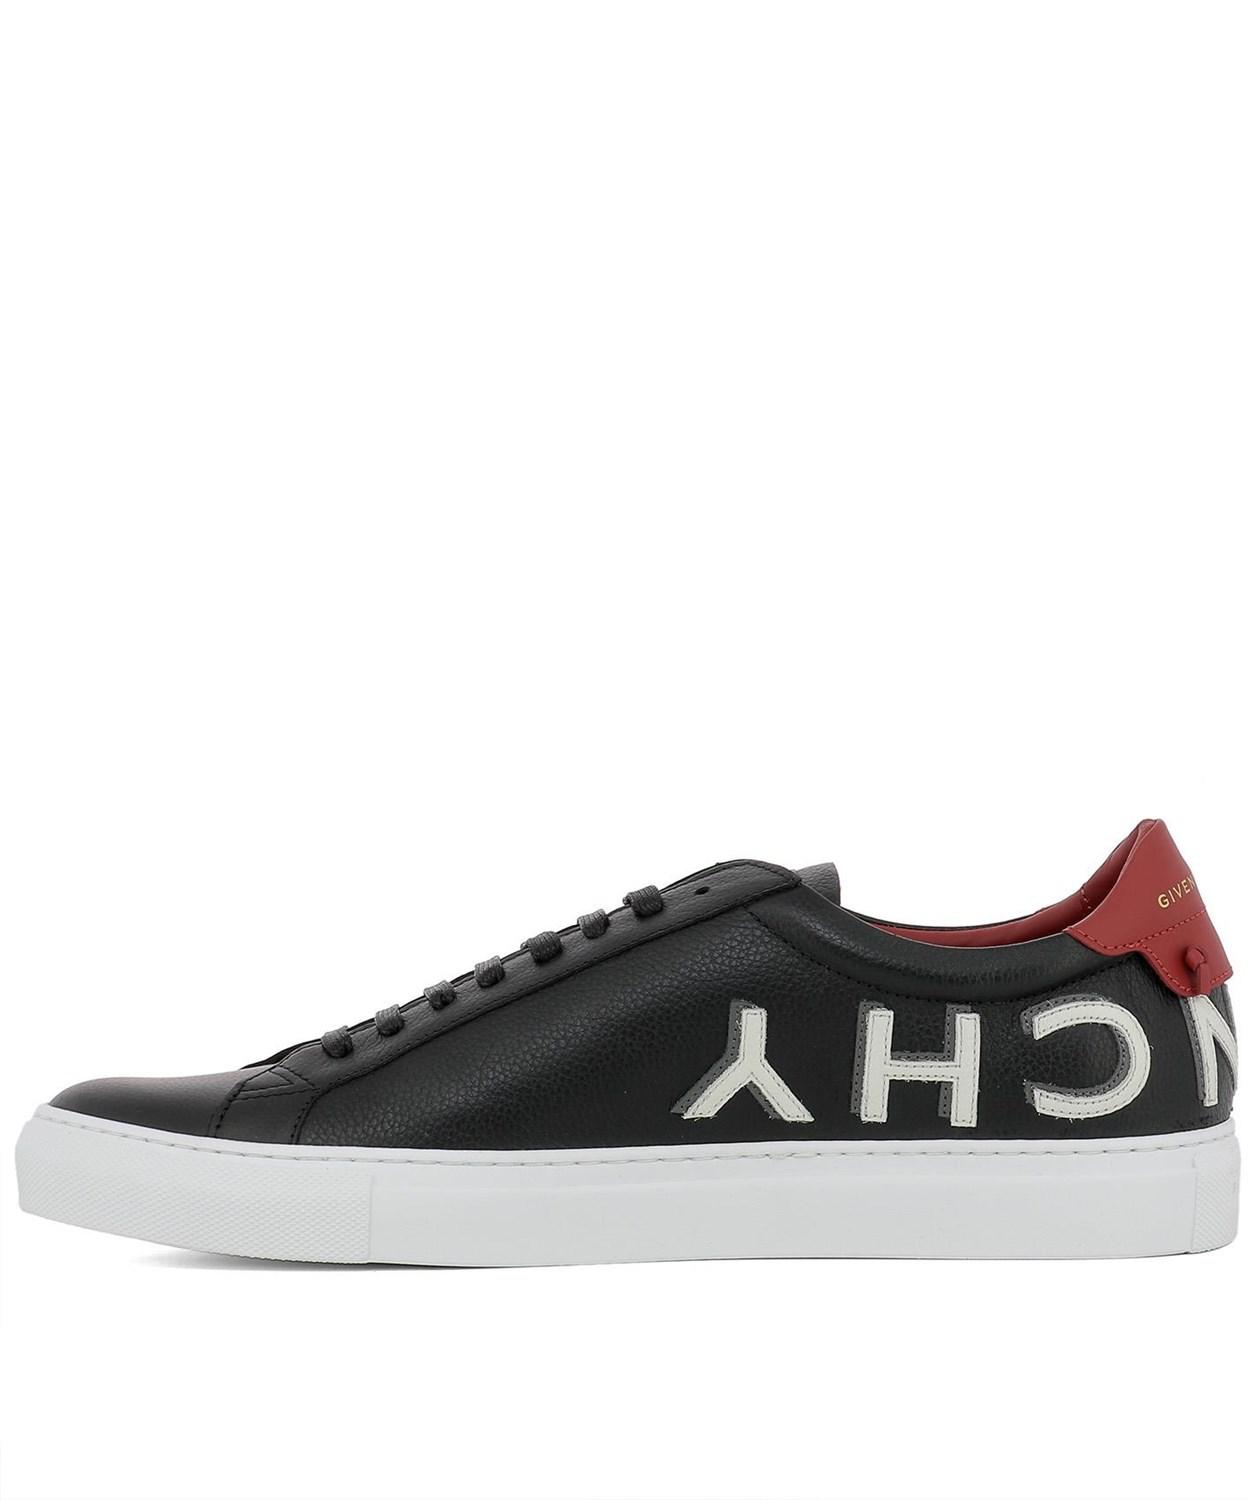 Givenchy Leather &quot;urban Street&quot; Sneakers Bh001dh05y009 in Black for Men - Lyst